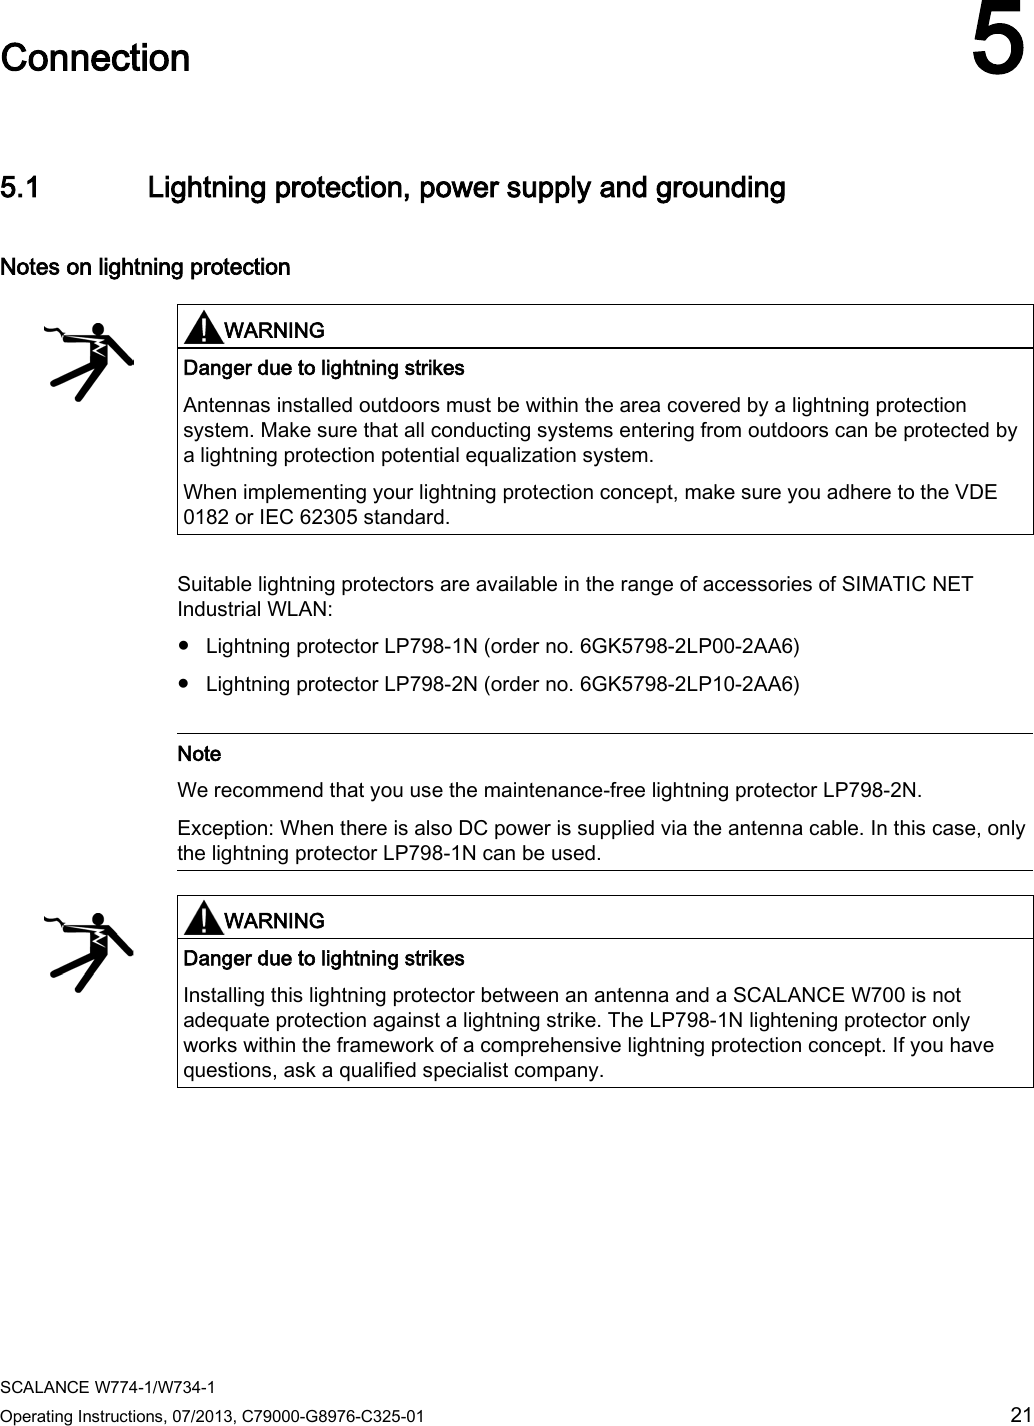  SCALANCE W774-1/W734-1 Operating Instructions, 07/2013, C79000-G8976-C325-01 21  Connection 5 5.1 Lightning protection, power supply and grounding Notes on lightning protection   WARNING Danger due to lightning strikes Antennas installed outdoors must be within the area covered by a lightning protection system. Make sure that all conducting systems entering from outdoors can be protected by a lightning protection potential equalization system. When implementing your lightning protection concept, make sure you adhere to the VDE 0182 or IEC 62305 standard.  Suitable lightning protectors are available in the range of accessories of SIMATIC NET Industrial WLAN: ● Lightning protector LP798-1N (order no. 6GK5798-2LP00-2AA6) ● Lightning protector LP798-2N (order no. 6GK5798-2LP10-2AA6)   Note We recommend that you use the maintenance-free lightning protector LP798-2N. Exception: When there is also DC power is supplied via the antenna cable. In this case, only the lightning protector LP798-1N can be used.   WARNING Danger due to lightning strikes Installing this lightning protector between an antenna and a SCALANCE W700 is not adequate protection against a lightning strike. The LP798-1N lightening protector only works within the framework of a comprehensive lightning protection concept. If you have questions, ask a qualified specialist company.  